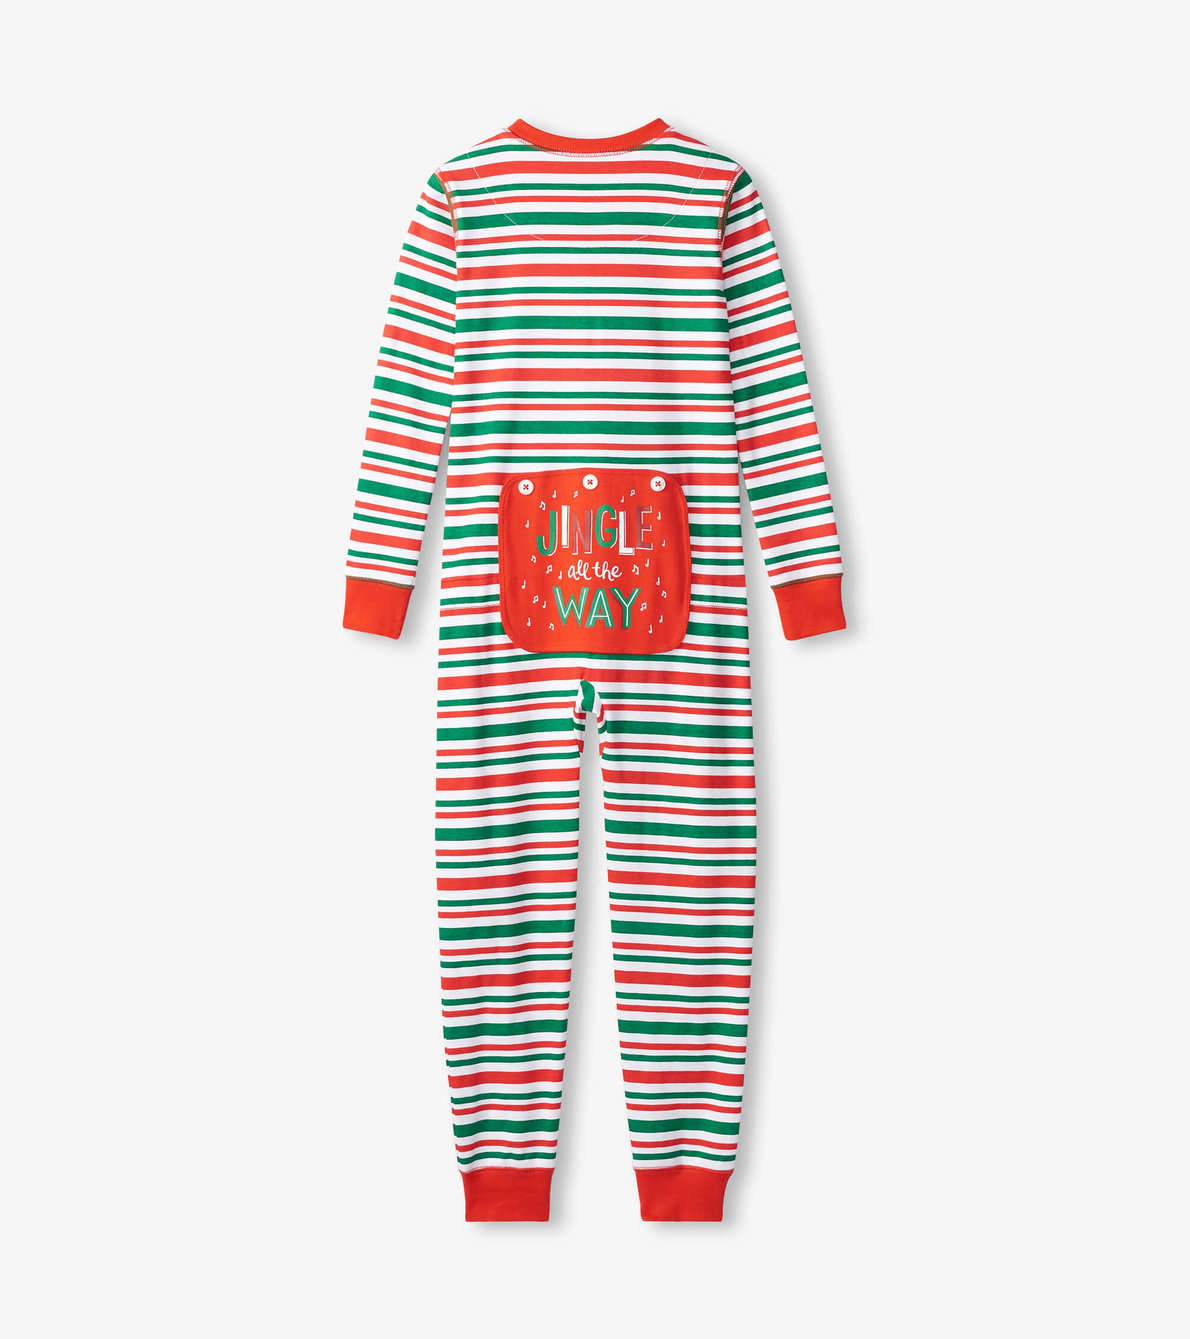 View larger image of Adult Jingle All The Way Onesie